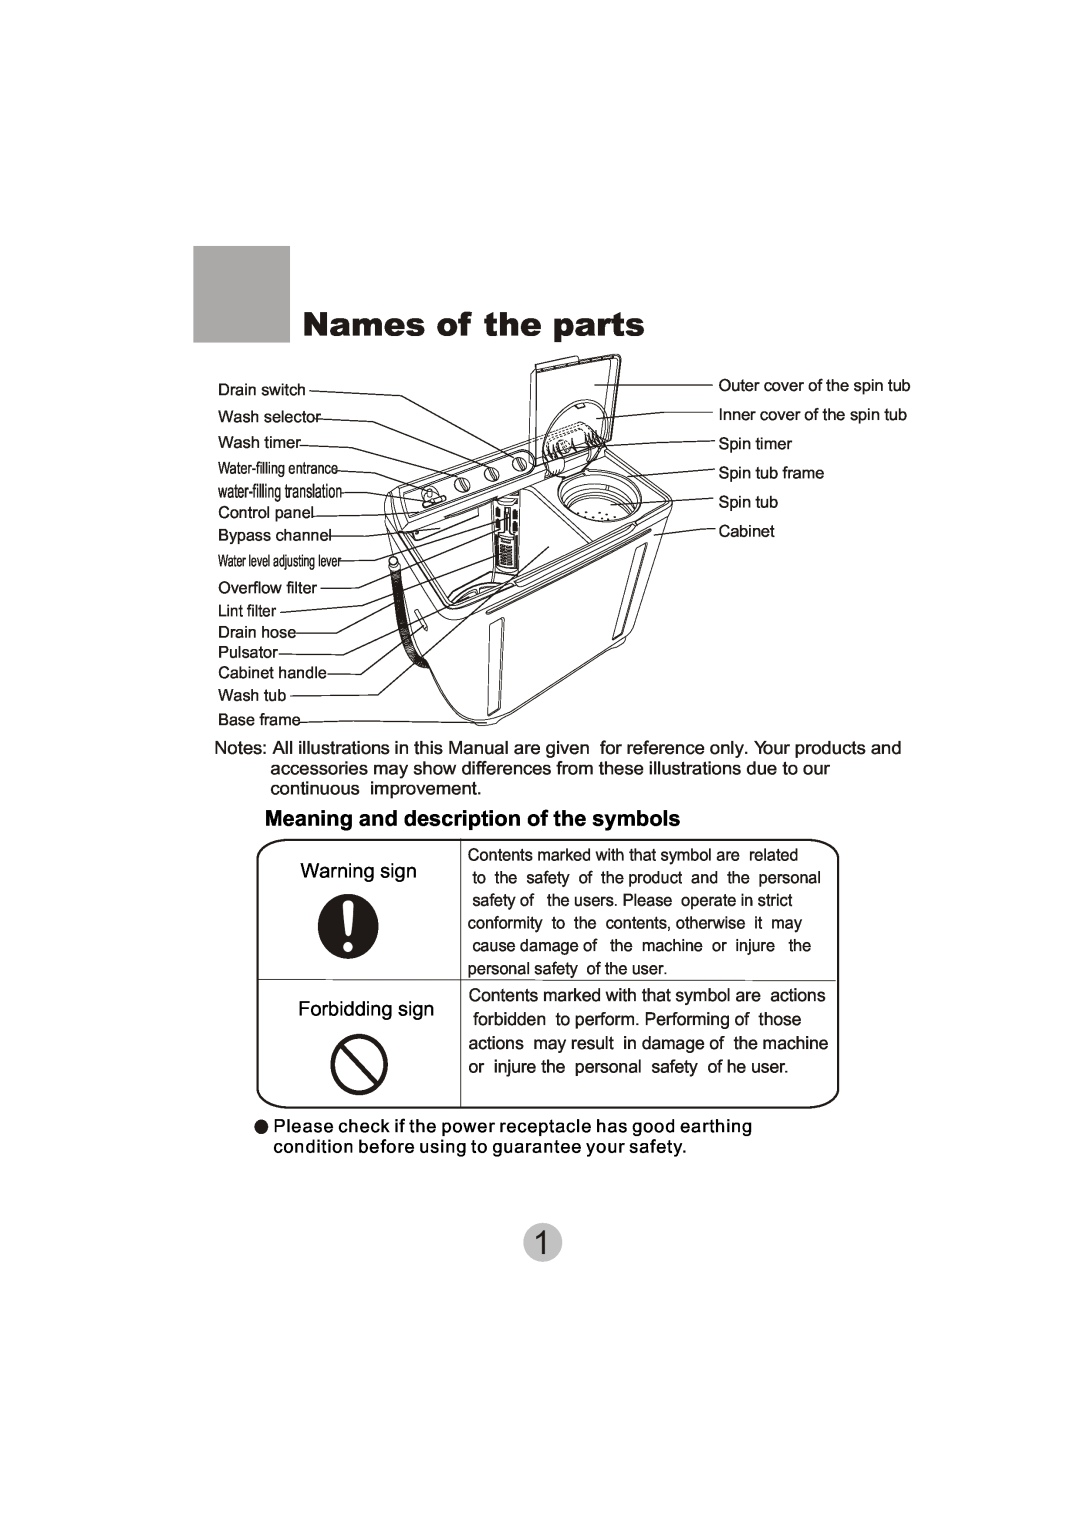 Haier XPB135-LA user manual Names of the parts, Meaning and description of the symbols, Warning sign Forbidding sign 